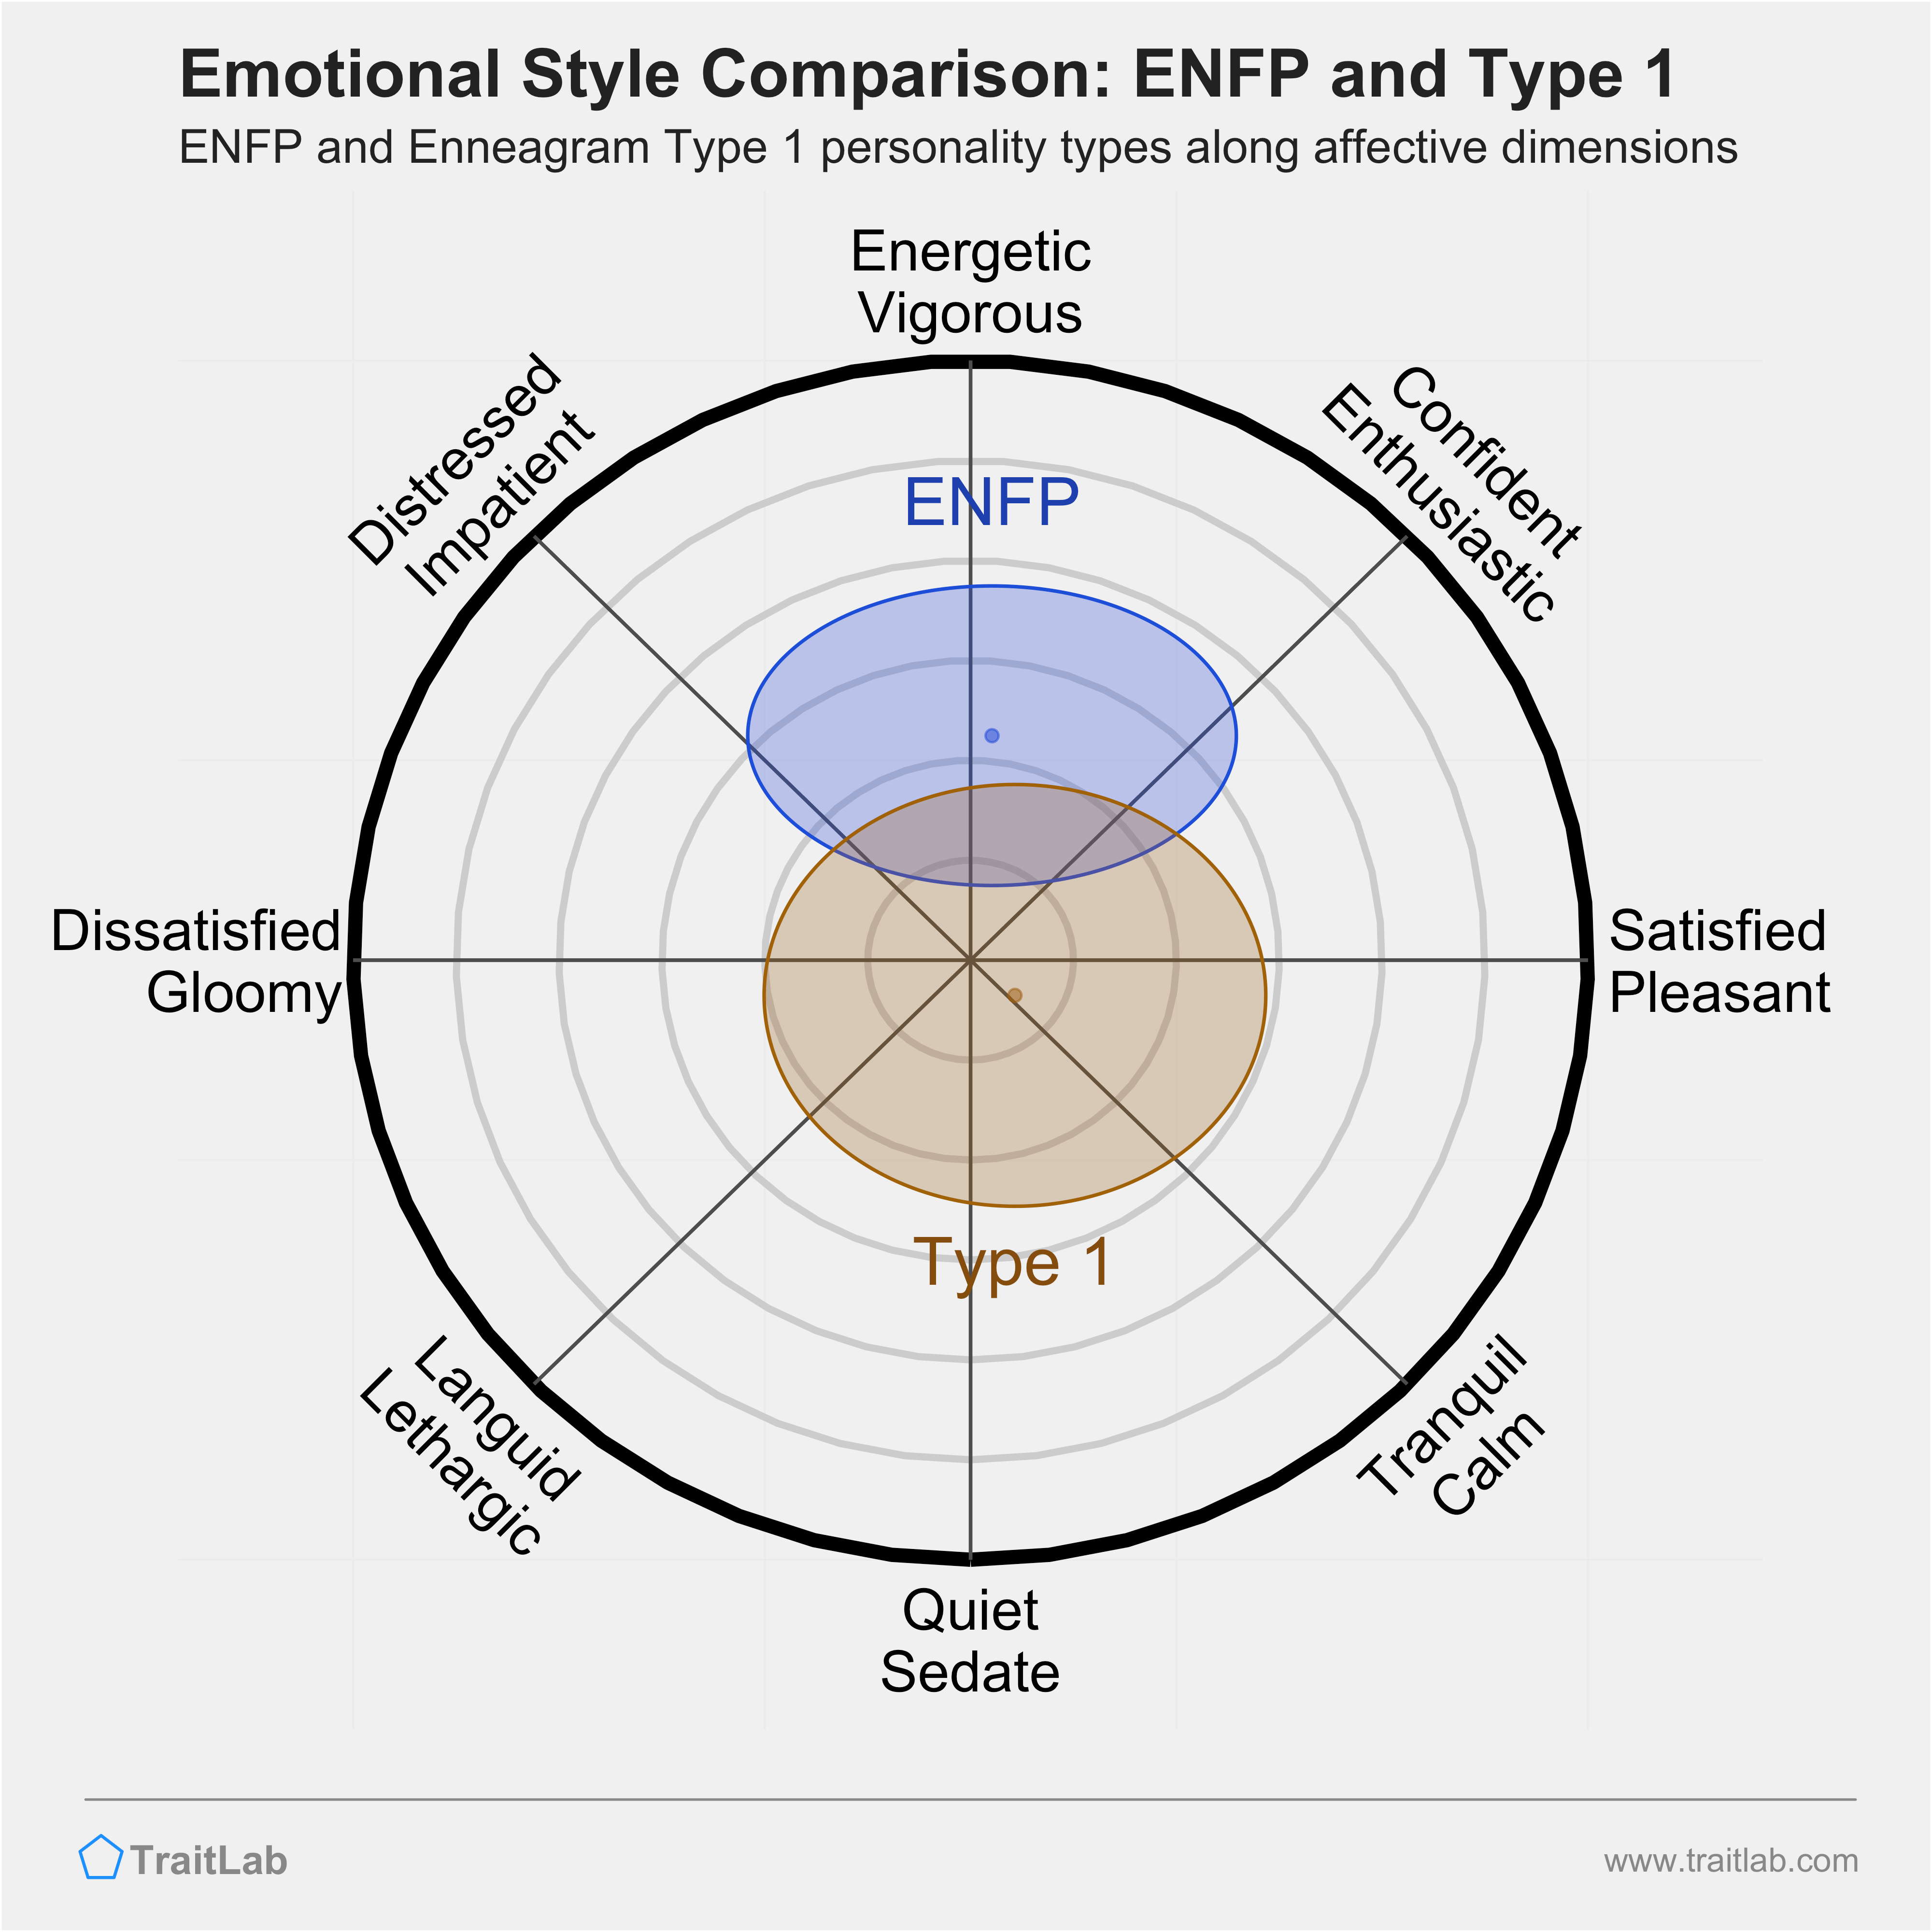 ENFP and Type 1 comparison across emotional (affective) dimensions